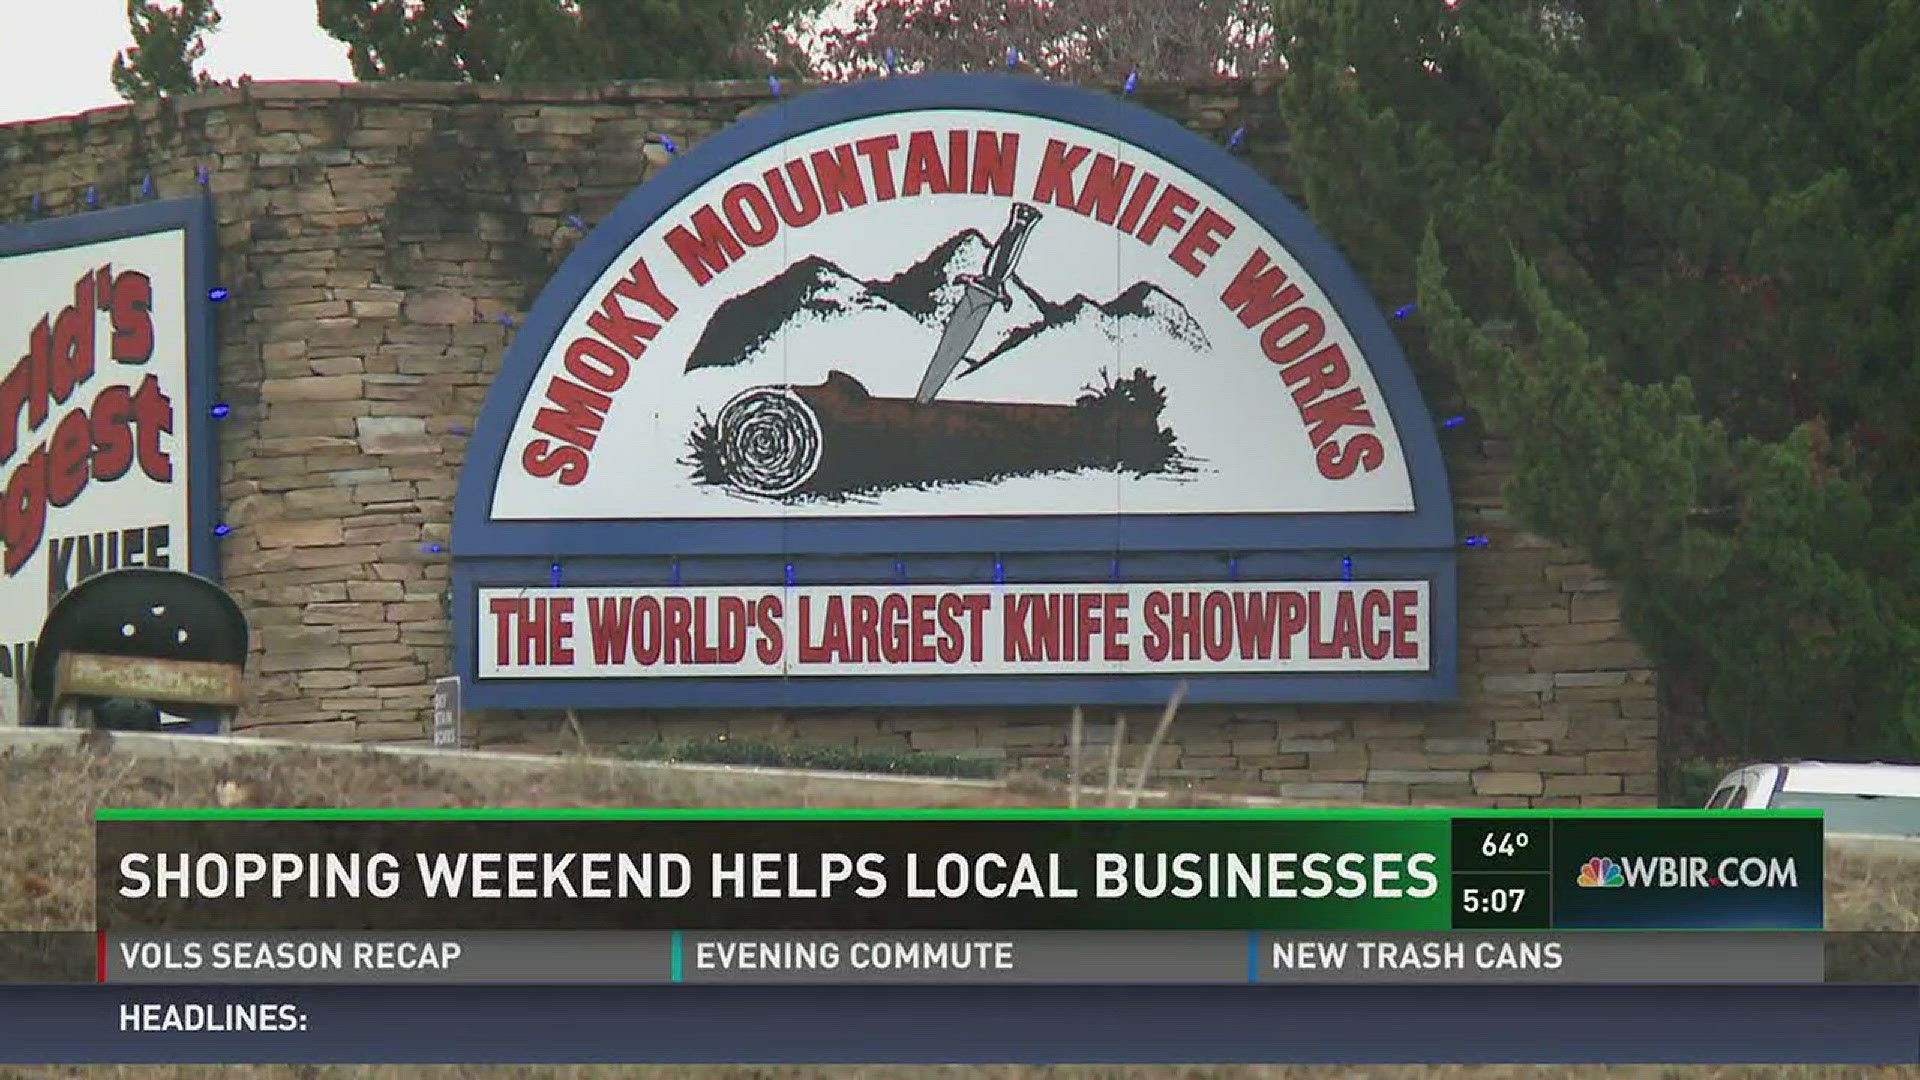 Smoky Mountain Knifeworks said this year's Black Friday was the biggest single sales day in the company's history p